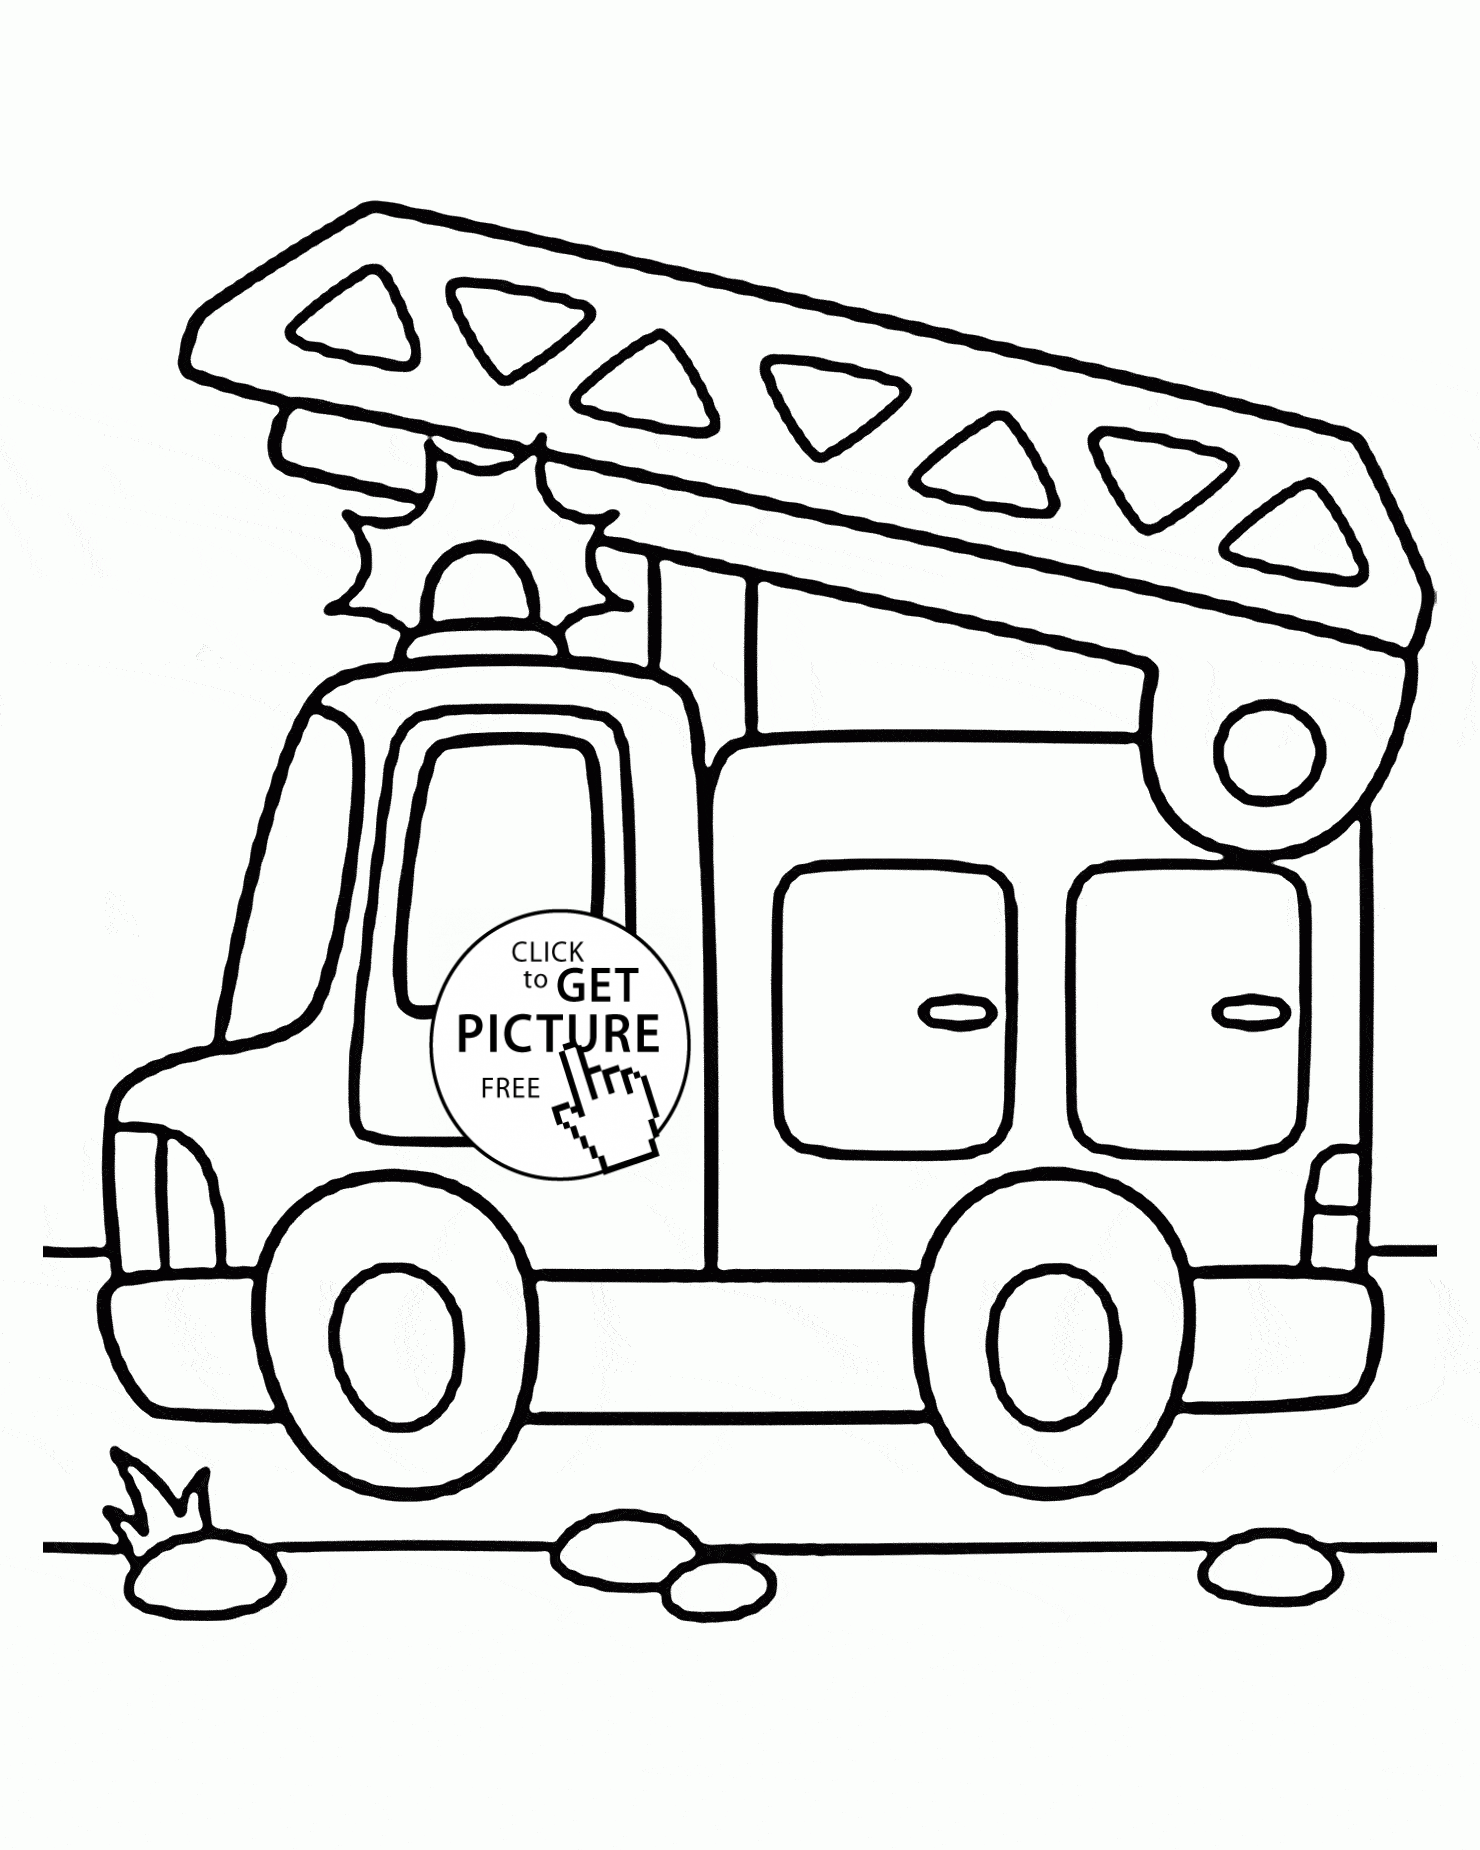 Cartoon Fire Truck coloring page for preschoolers, transportation coloring  pages prin… | Firetruck coloring page, Truck coloring pages, Monster truck coloring  pages